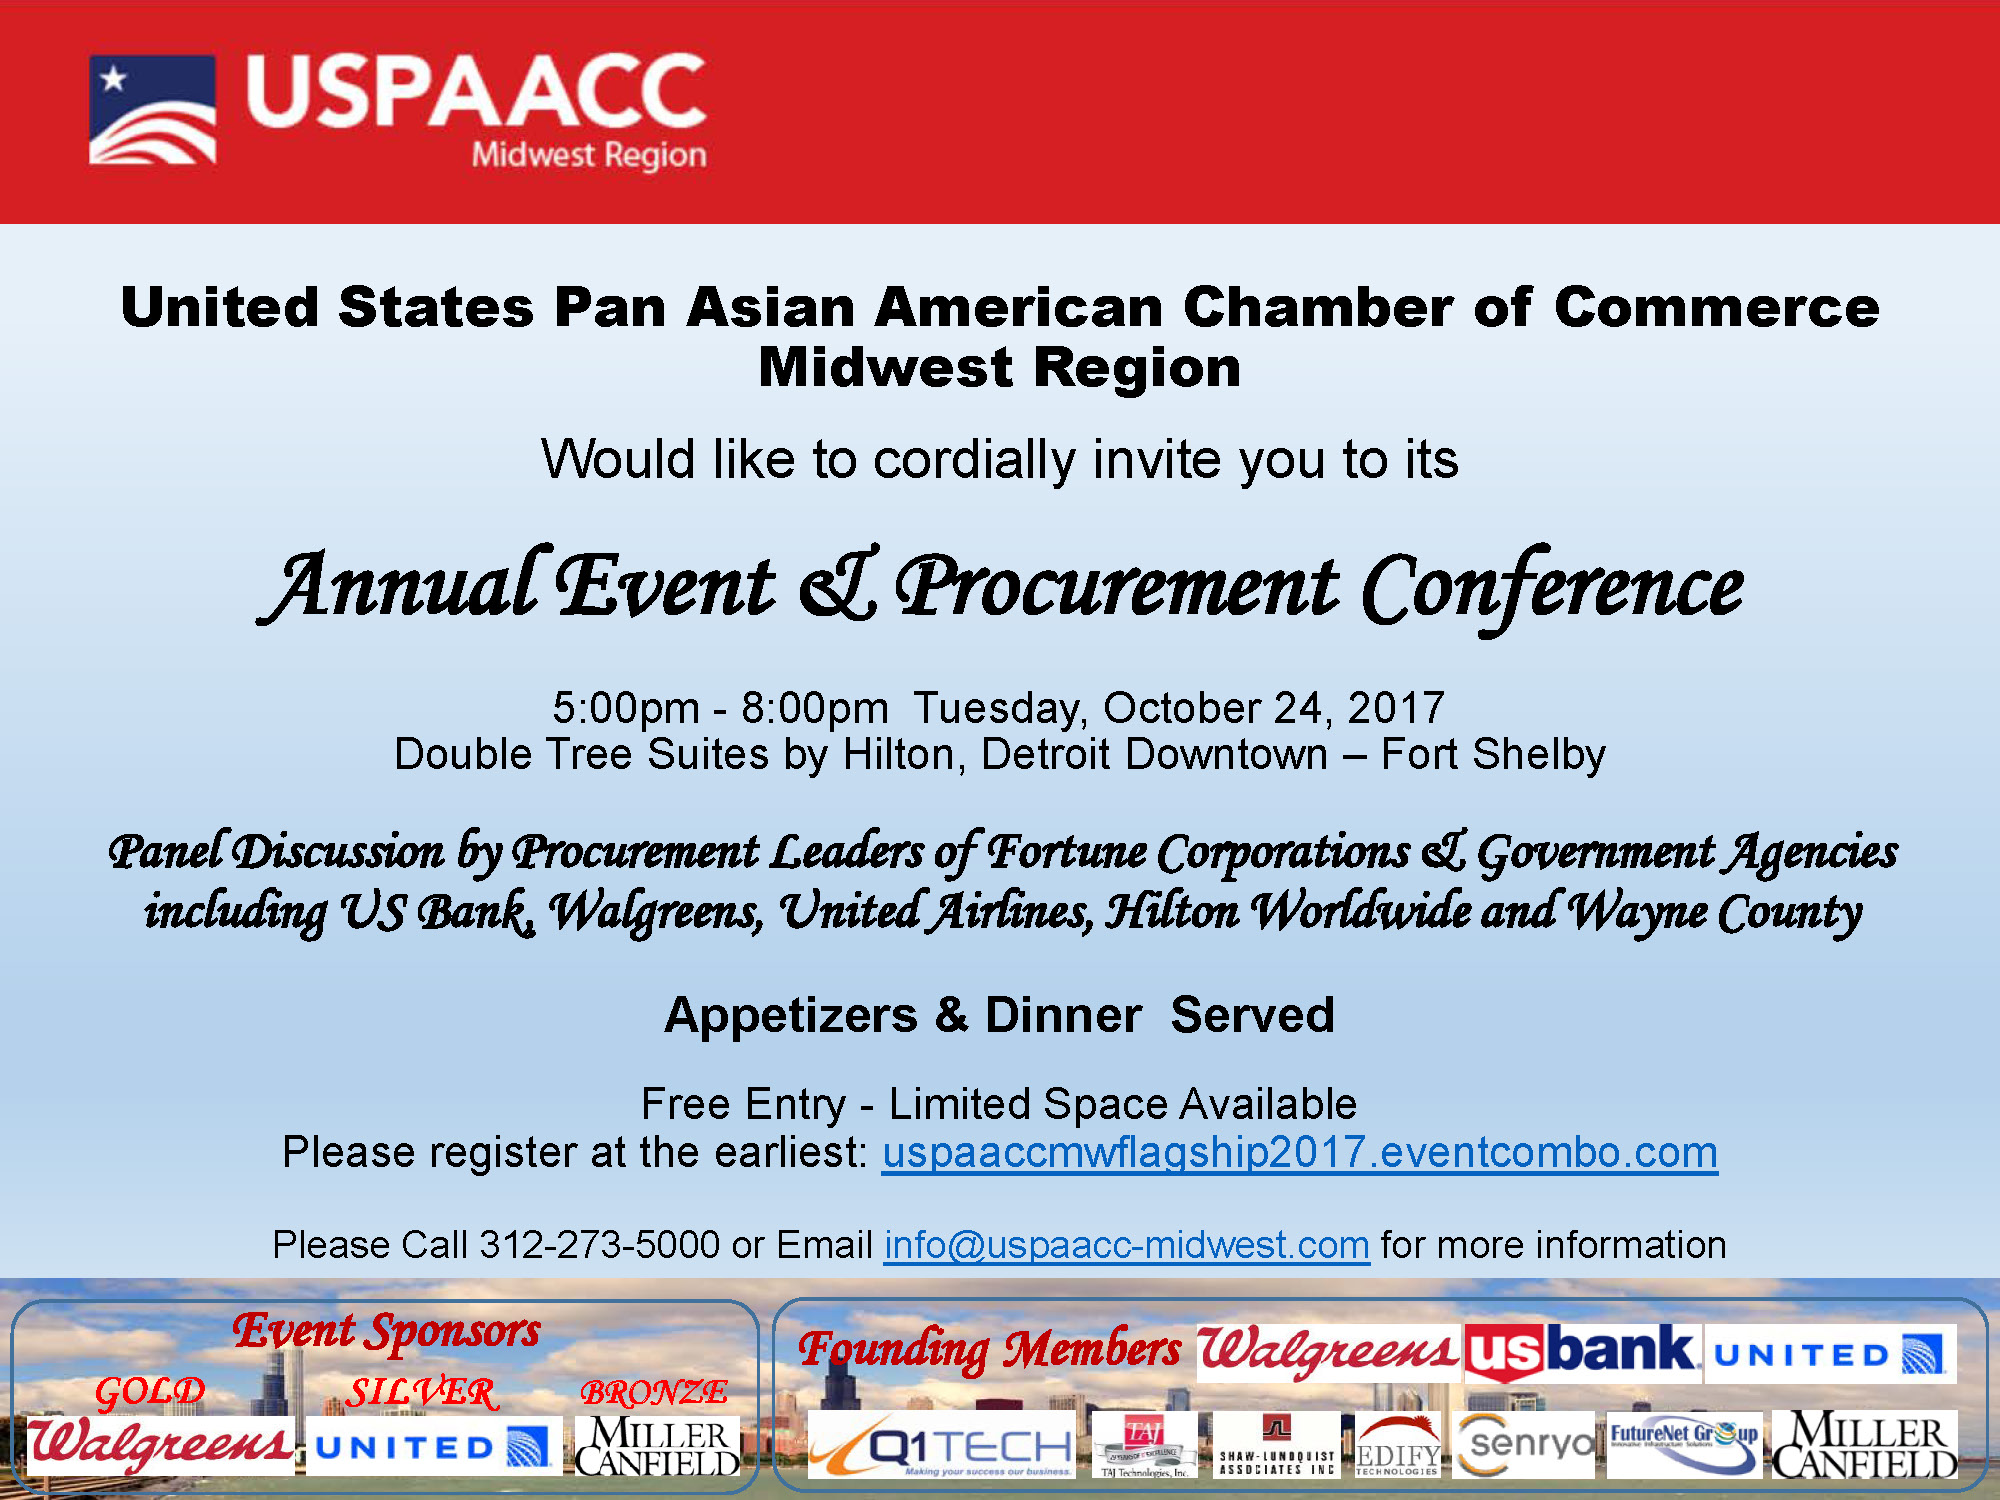 USPAACC Midwest Annual Flagship Event & Procurement Conference